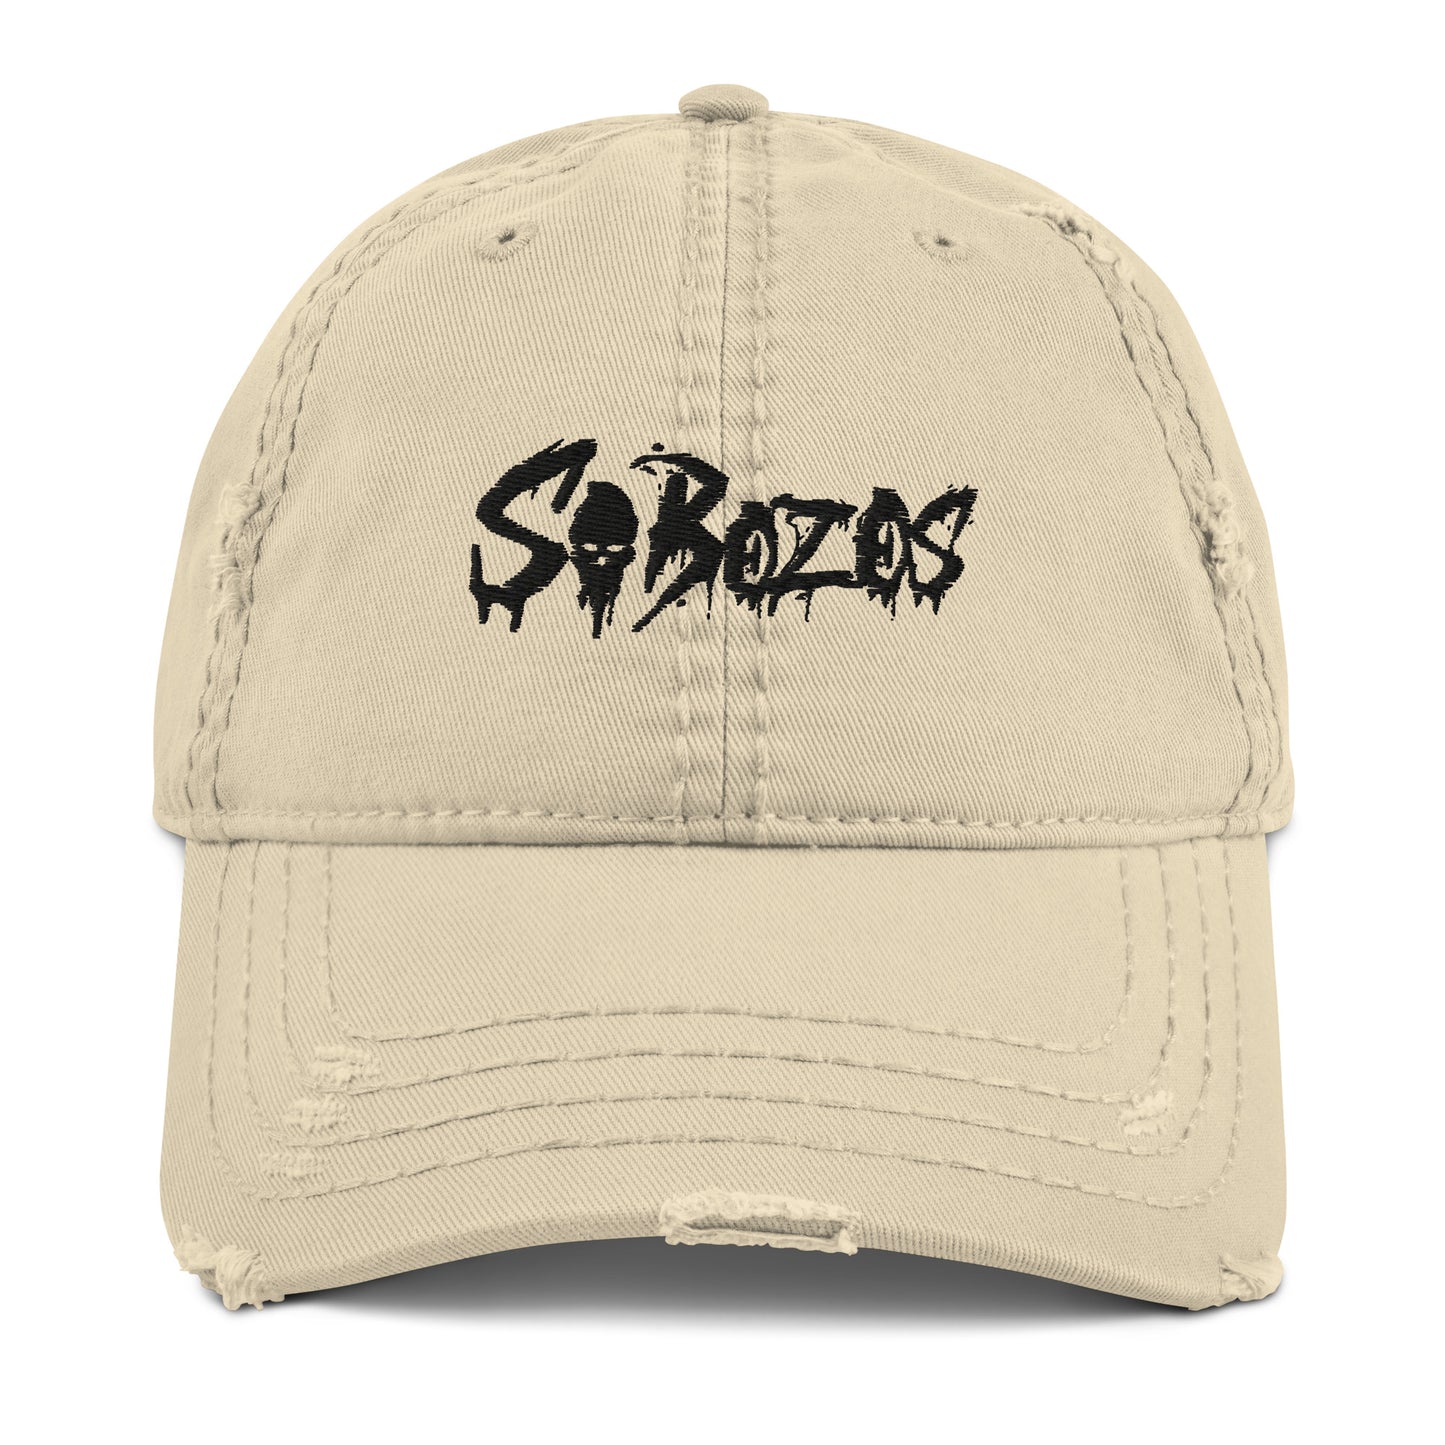 SoBozos Hat (embroidery)